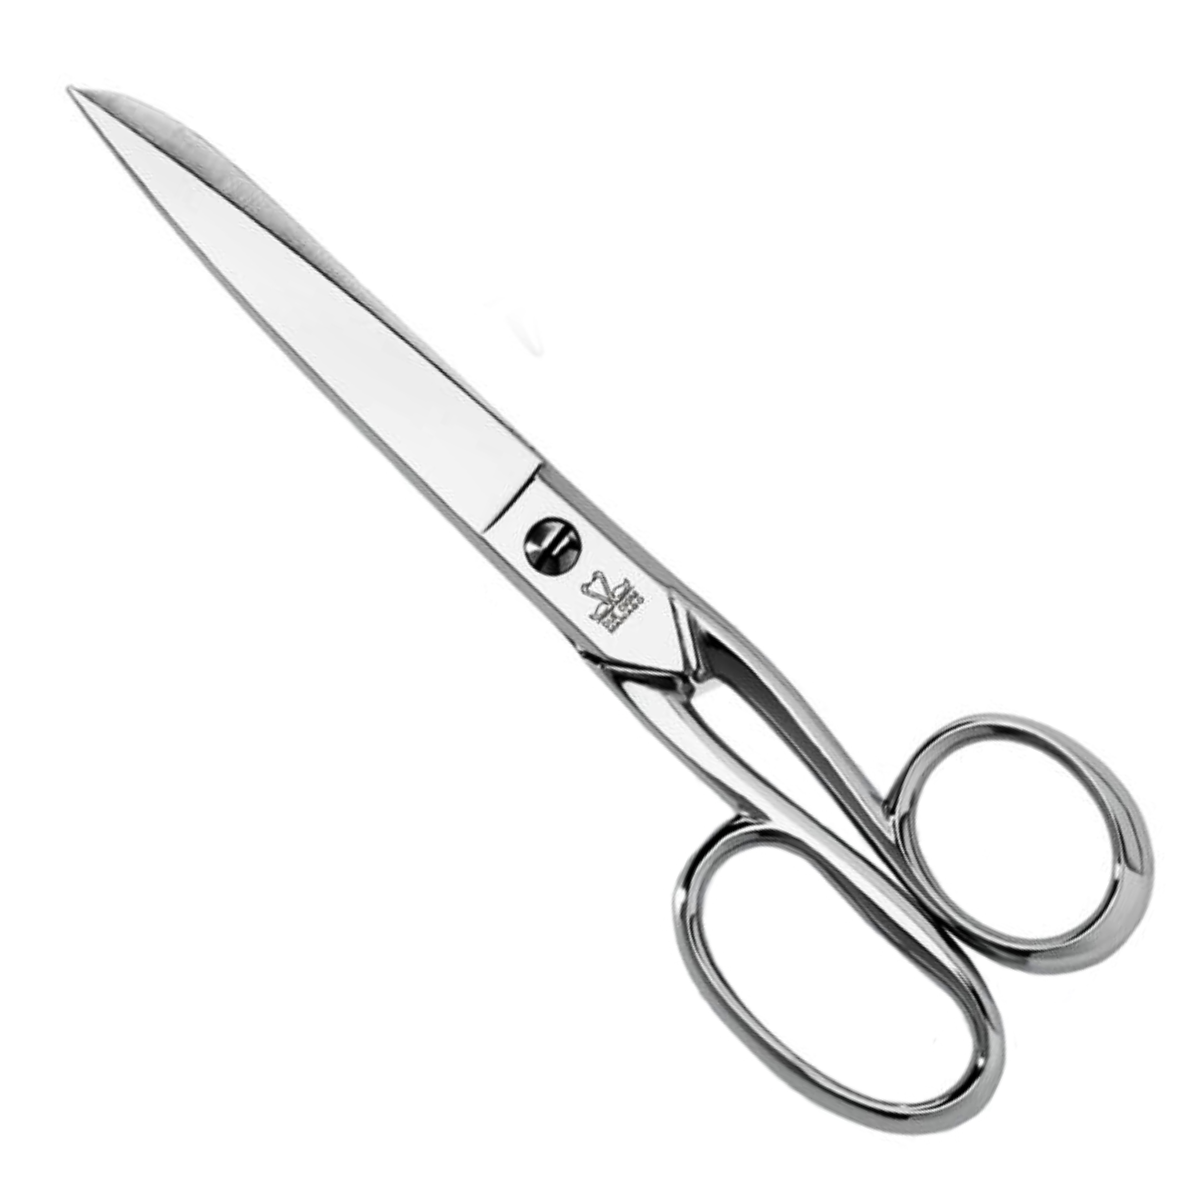 7 Inch Steel Household Scissors With Left Handled Offset Handle